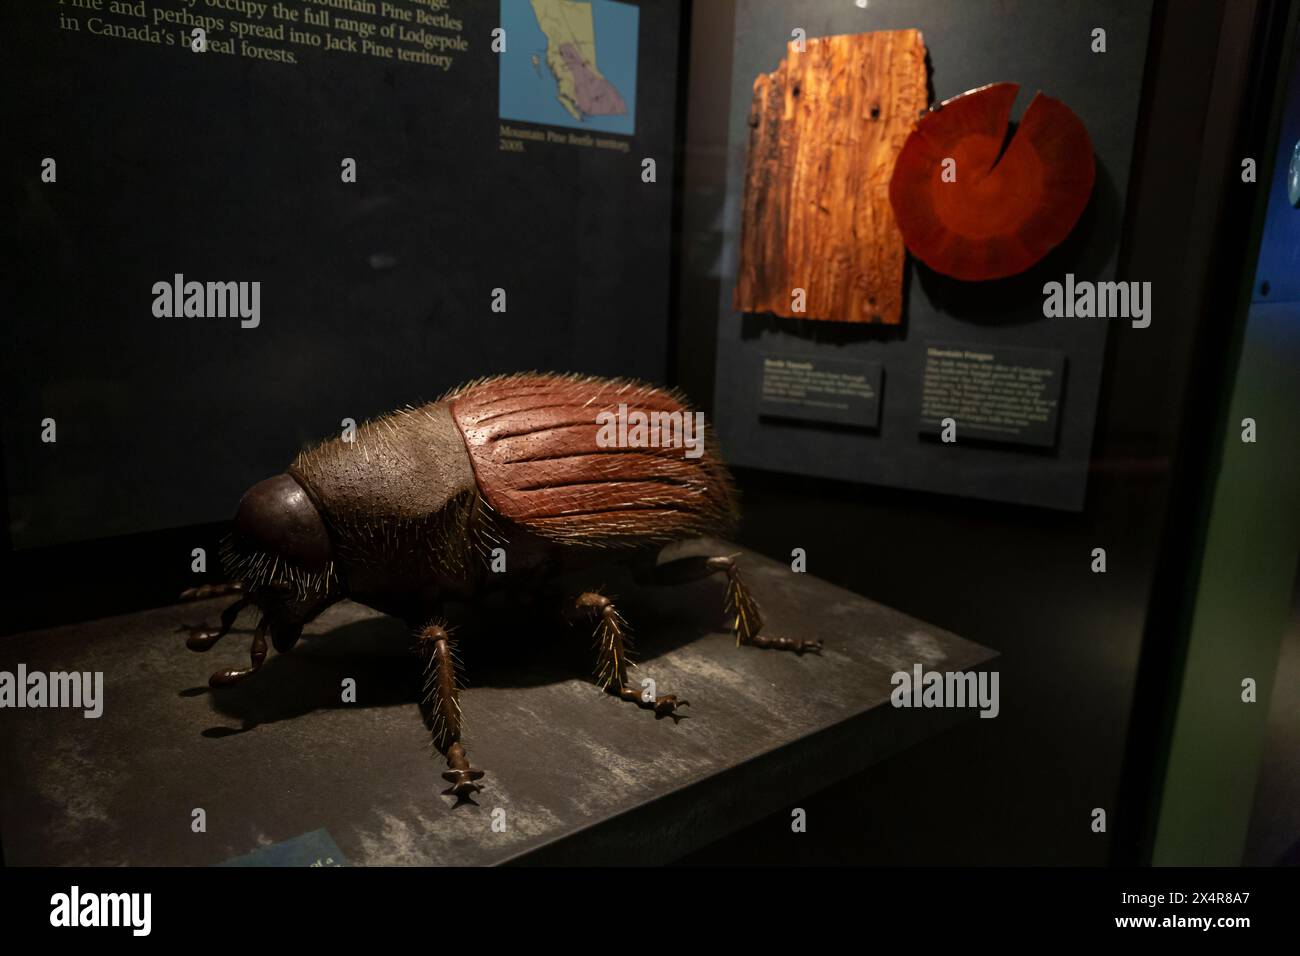 Large model of a mountain pine beetle on display in the Climate Rules gallery at the Royal BC Museum in Victoria, British Columbia, Canada. Stock Photo